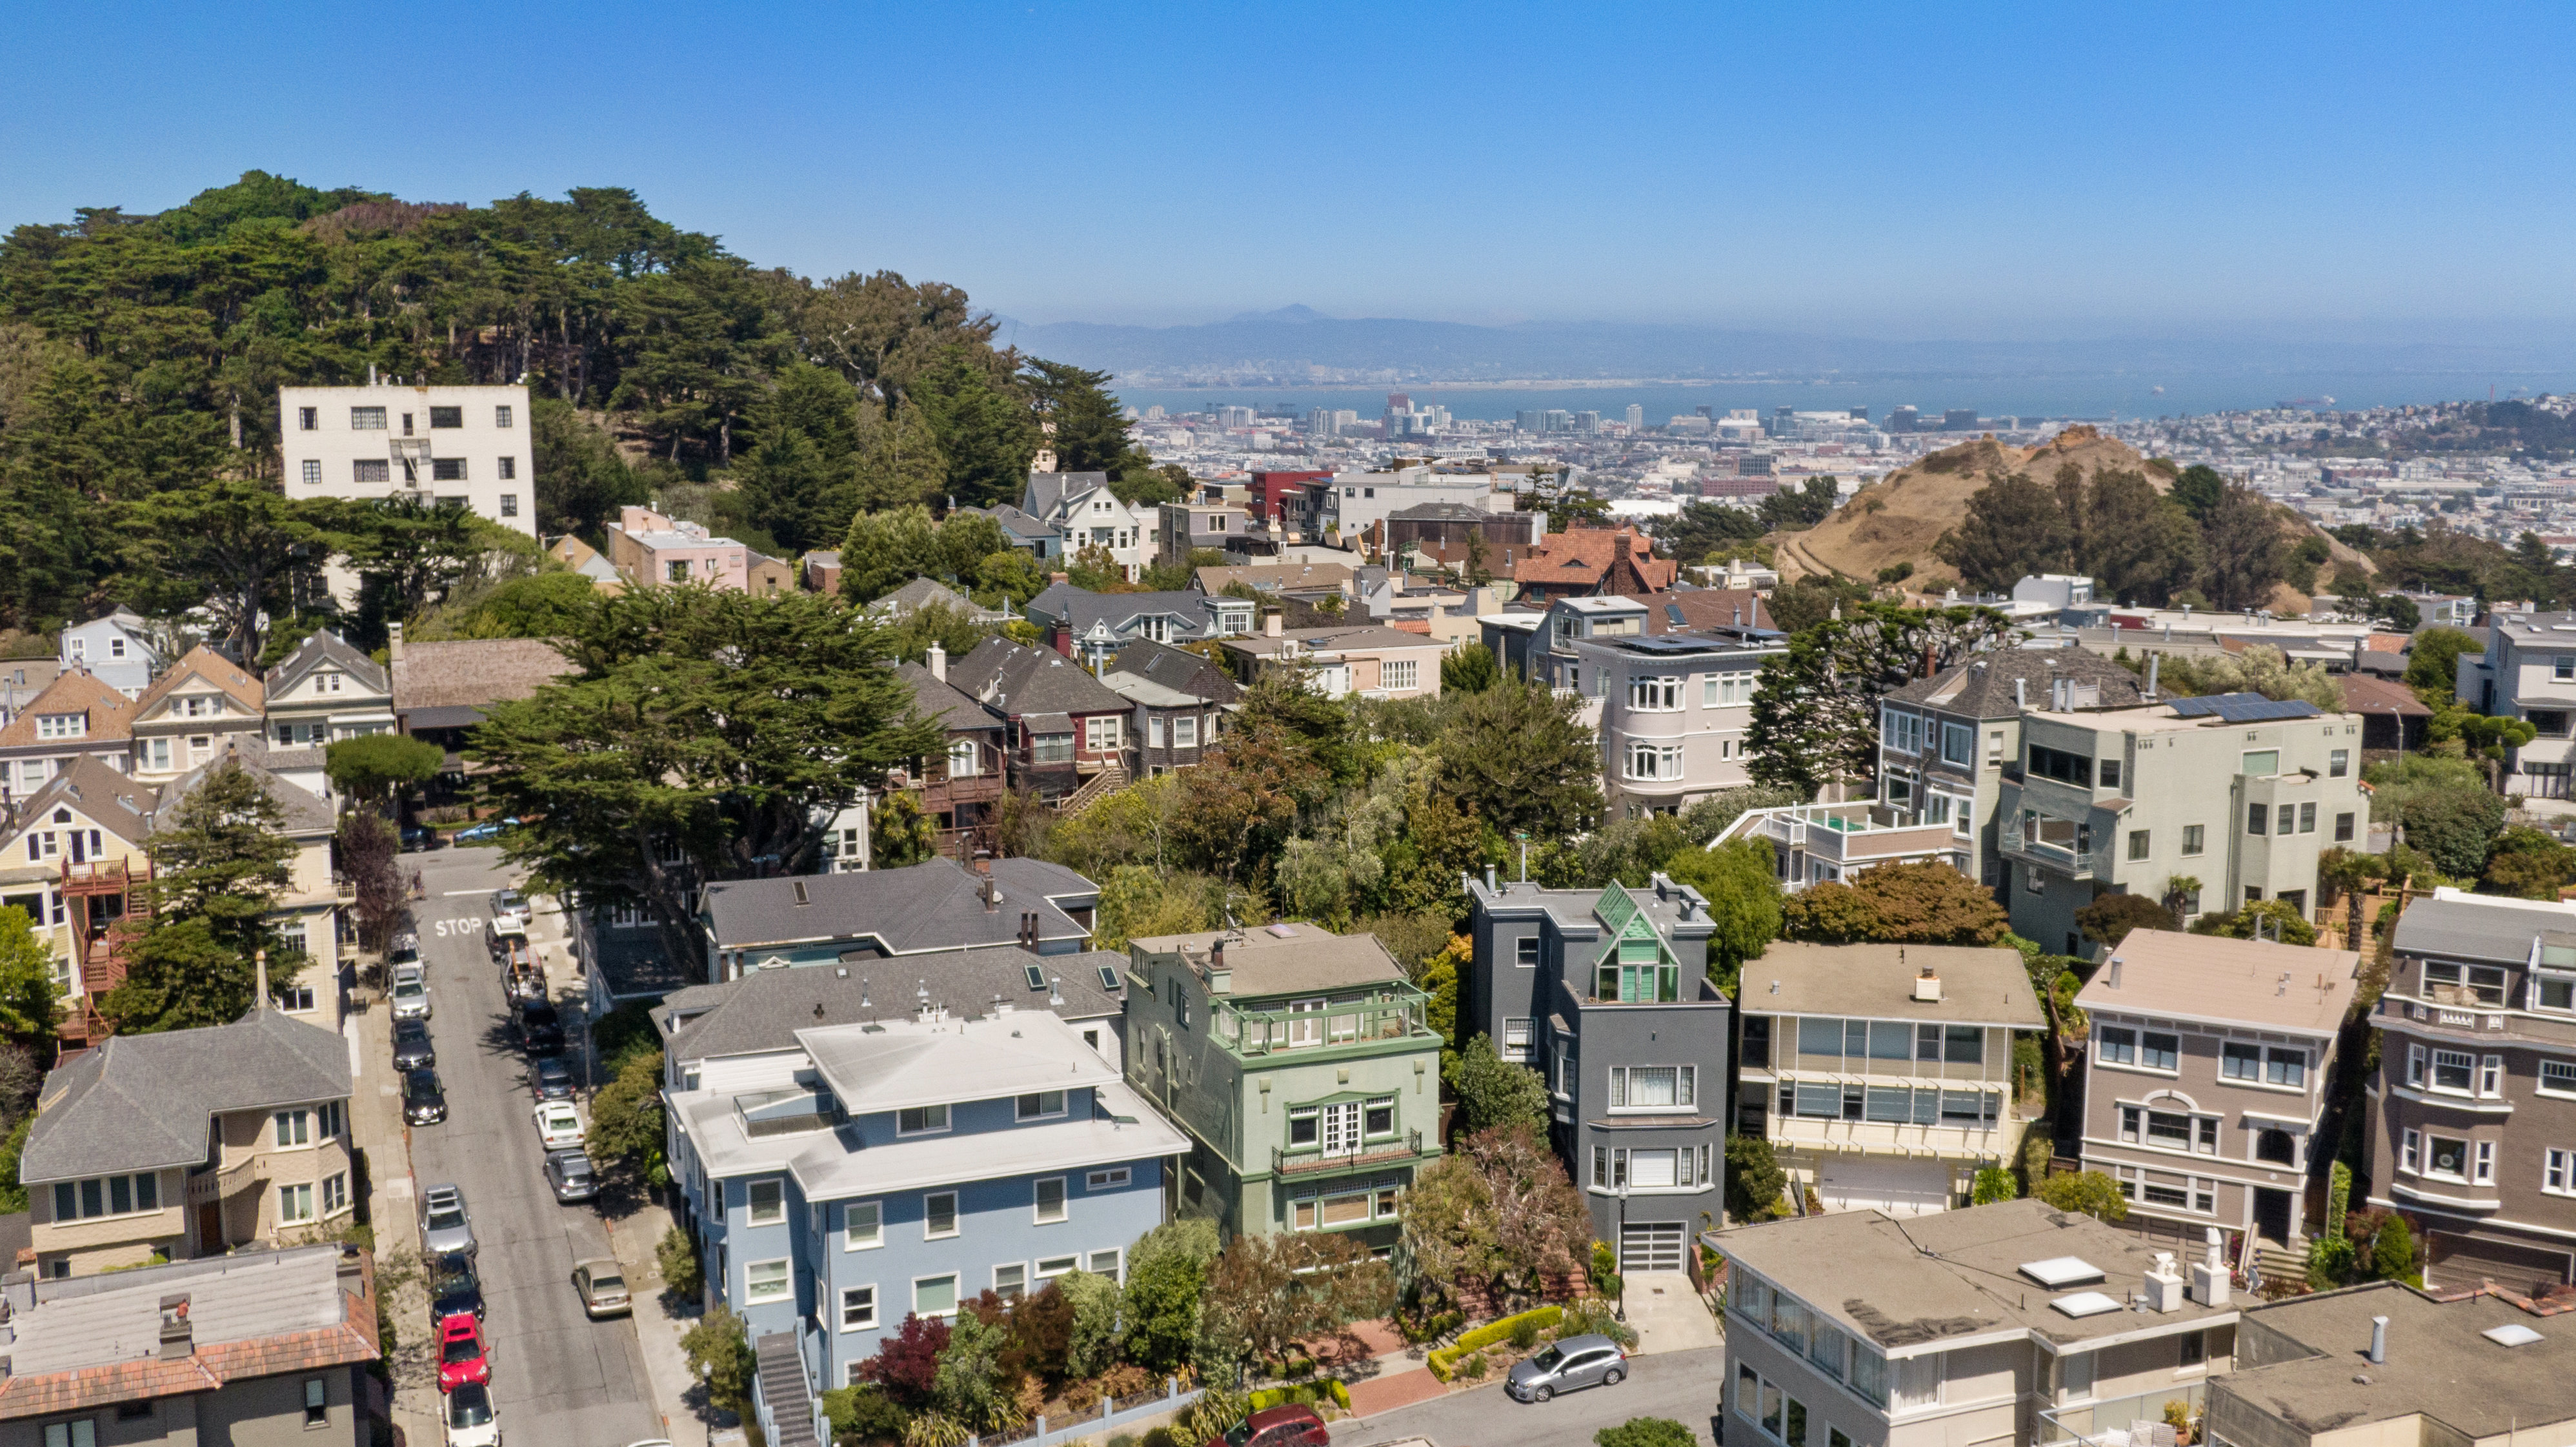 Property Photo: Aerial view of 4 Ashbury Terrace, showing proximity to San Francisco Bay and Buena Vista Park